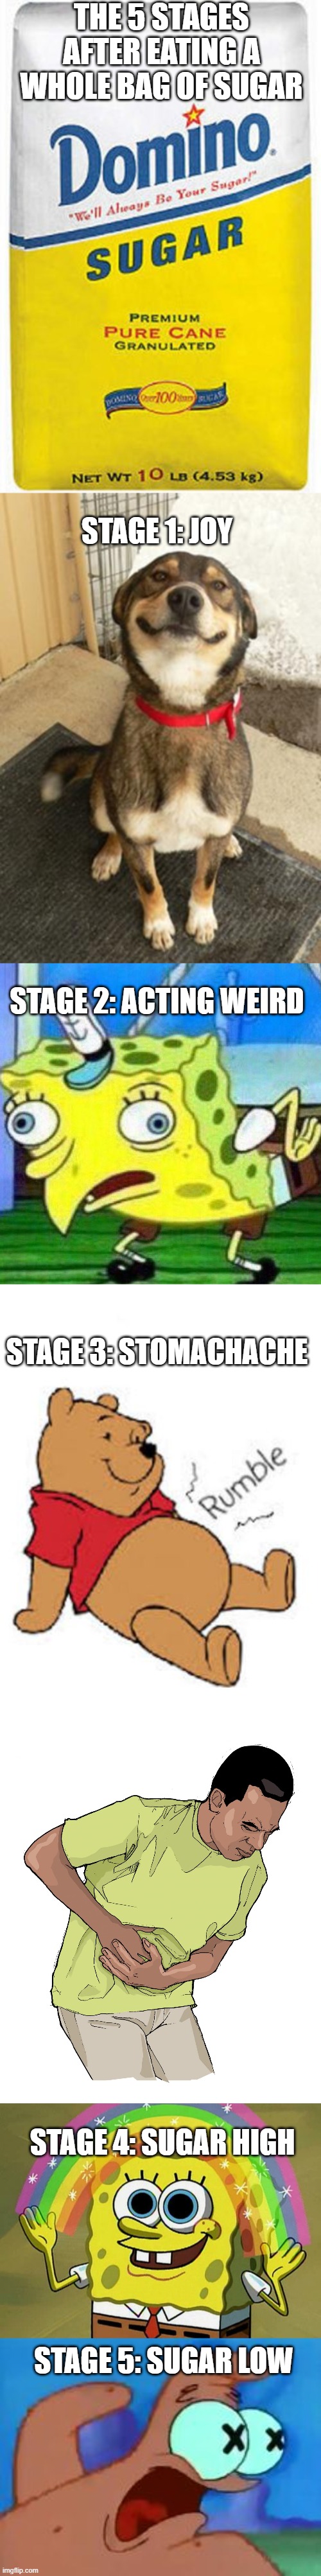 The 5 stages of Sugar consumption | THE 5 STAGES AFTER EATING A WHOLE BAG OF SUGAR; STAGE 1: JOY; STAGE 2: ACTING WEIRD; STAGE 3: STOMACHACHE; STAGE 4: SUGAR HIGH; STAGE 5: SUGAR LOW | image tagged in bag of sugar,dog smiling big,triggerpaul,tummy rumble,eola-stomach-pain jpg,memes | made w/ Imgflip meme maker